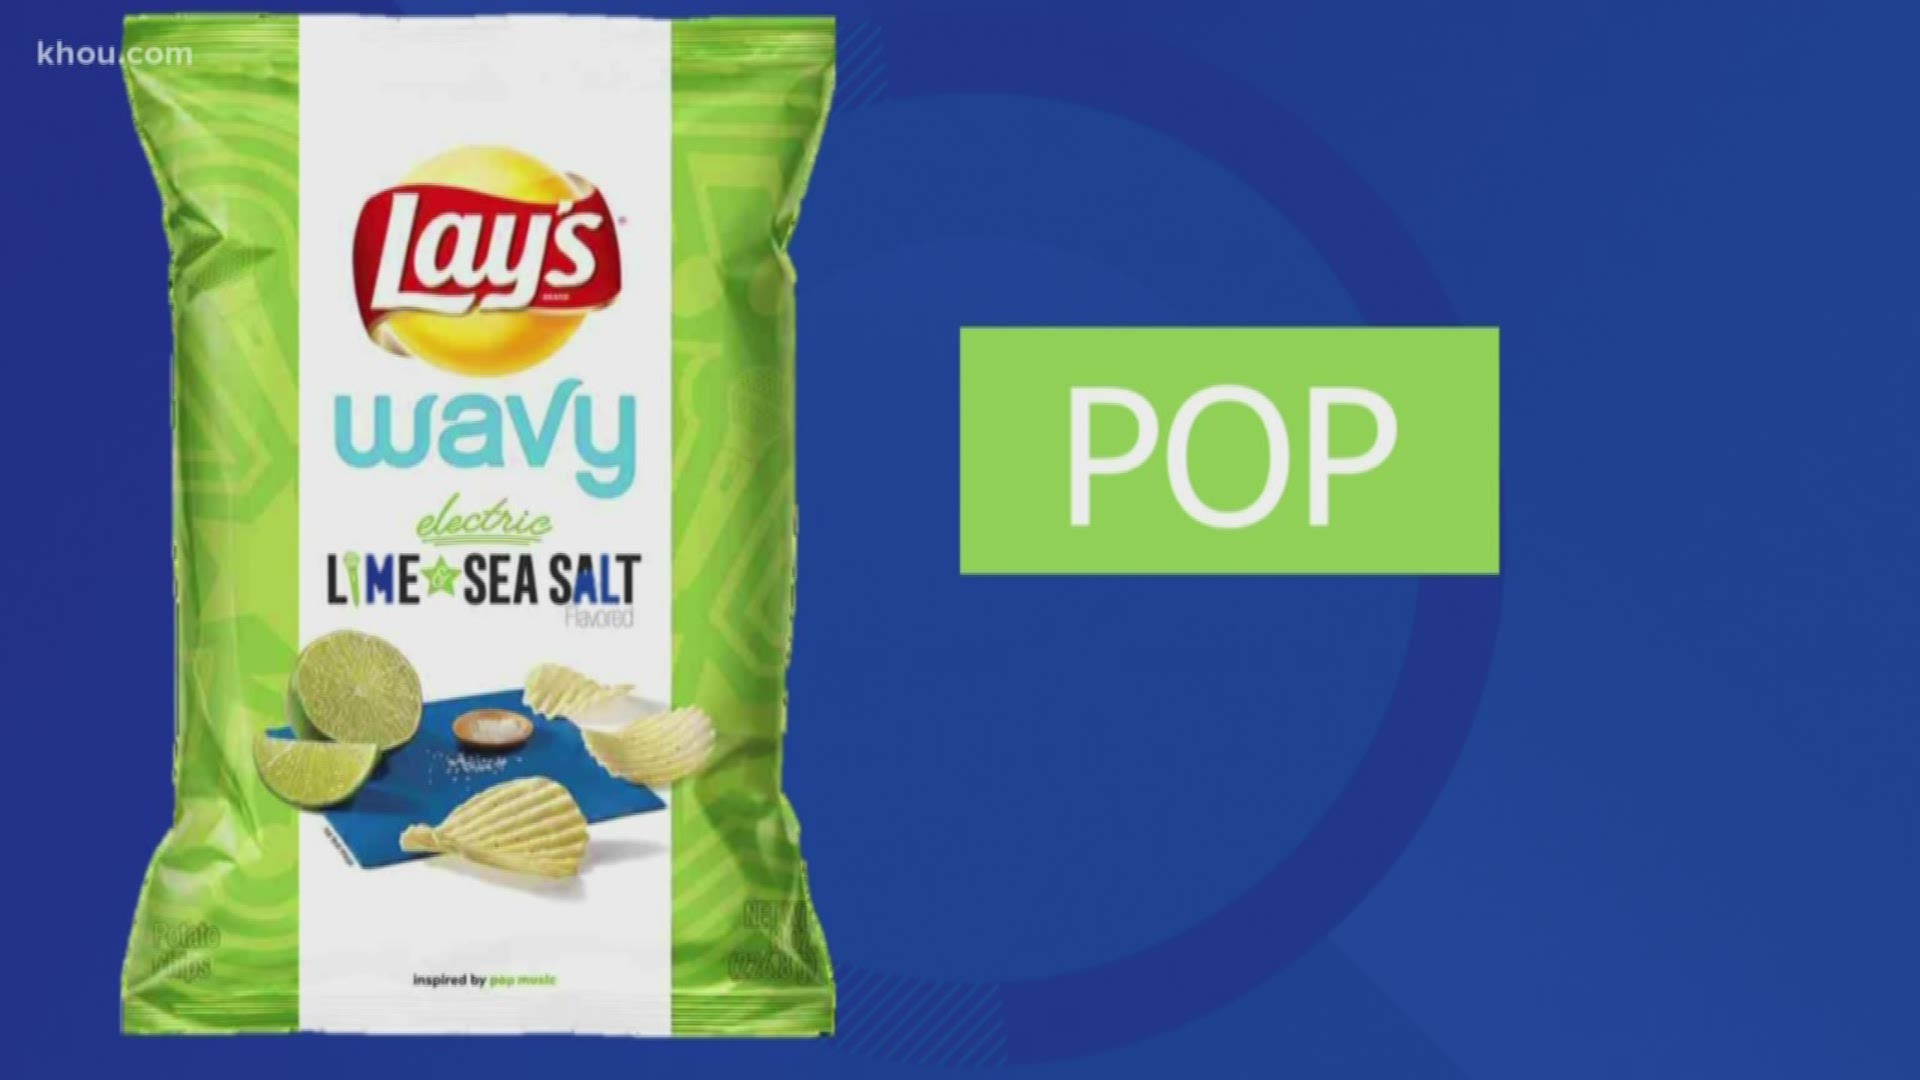 Lay's is adding some new flavors to their collection. The new potato chips are inspired by music genres.